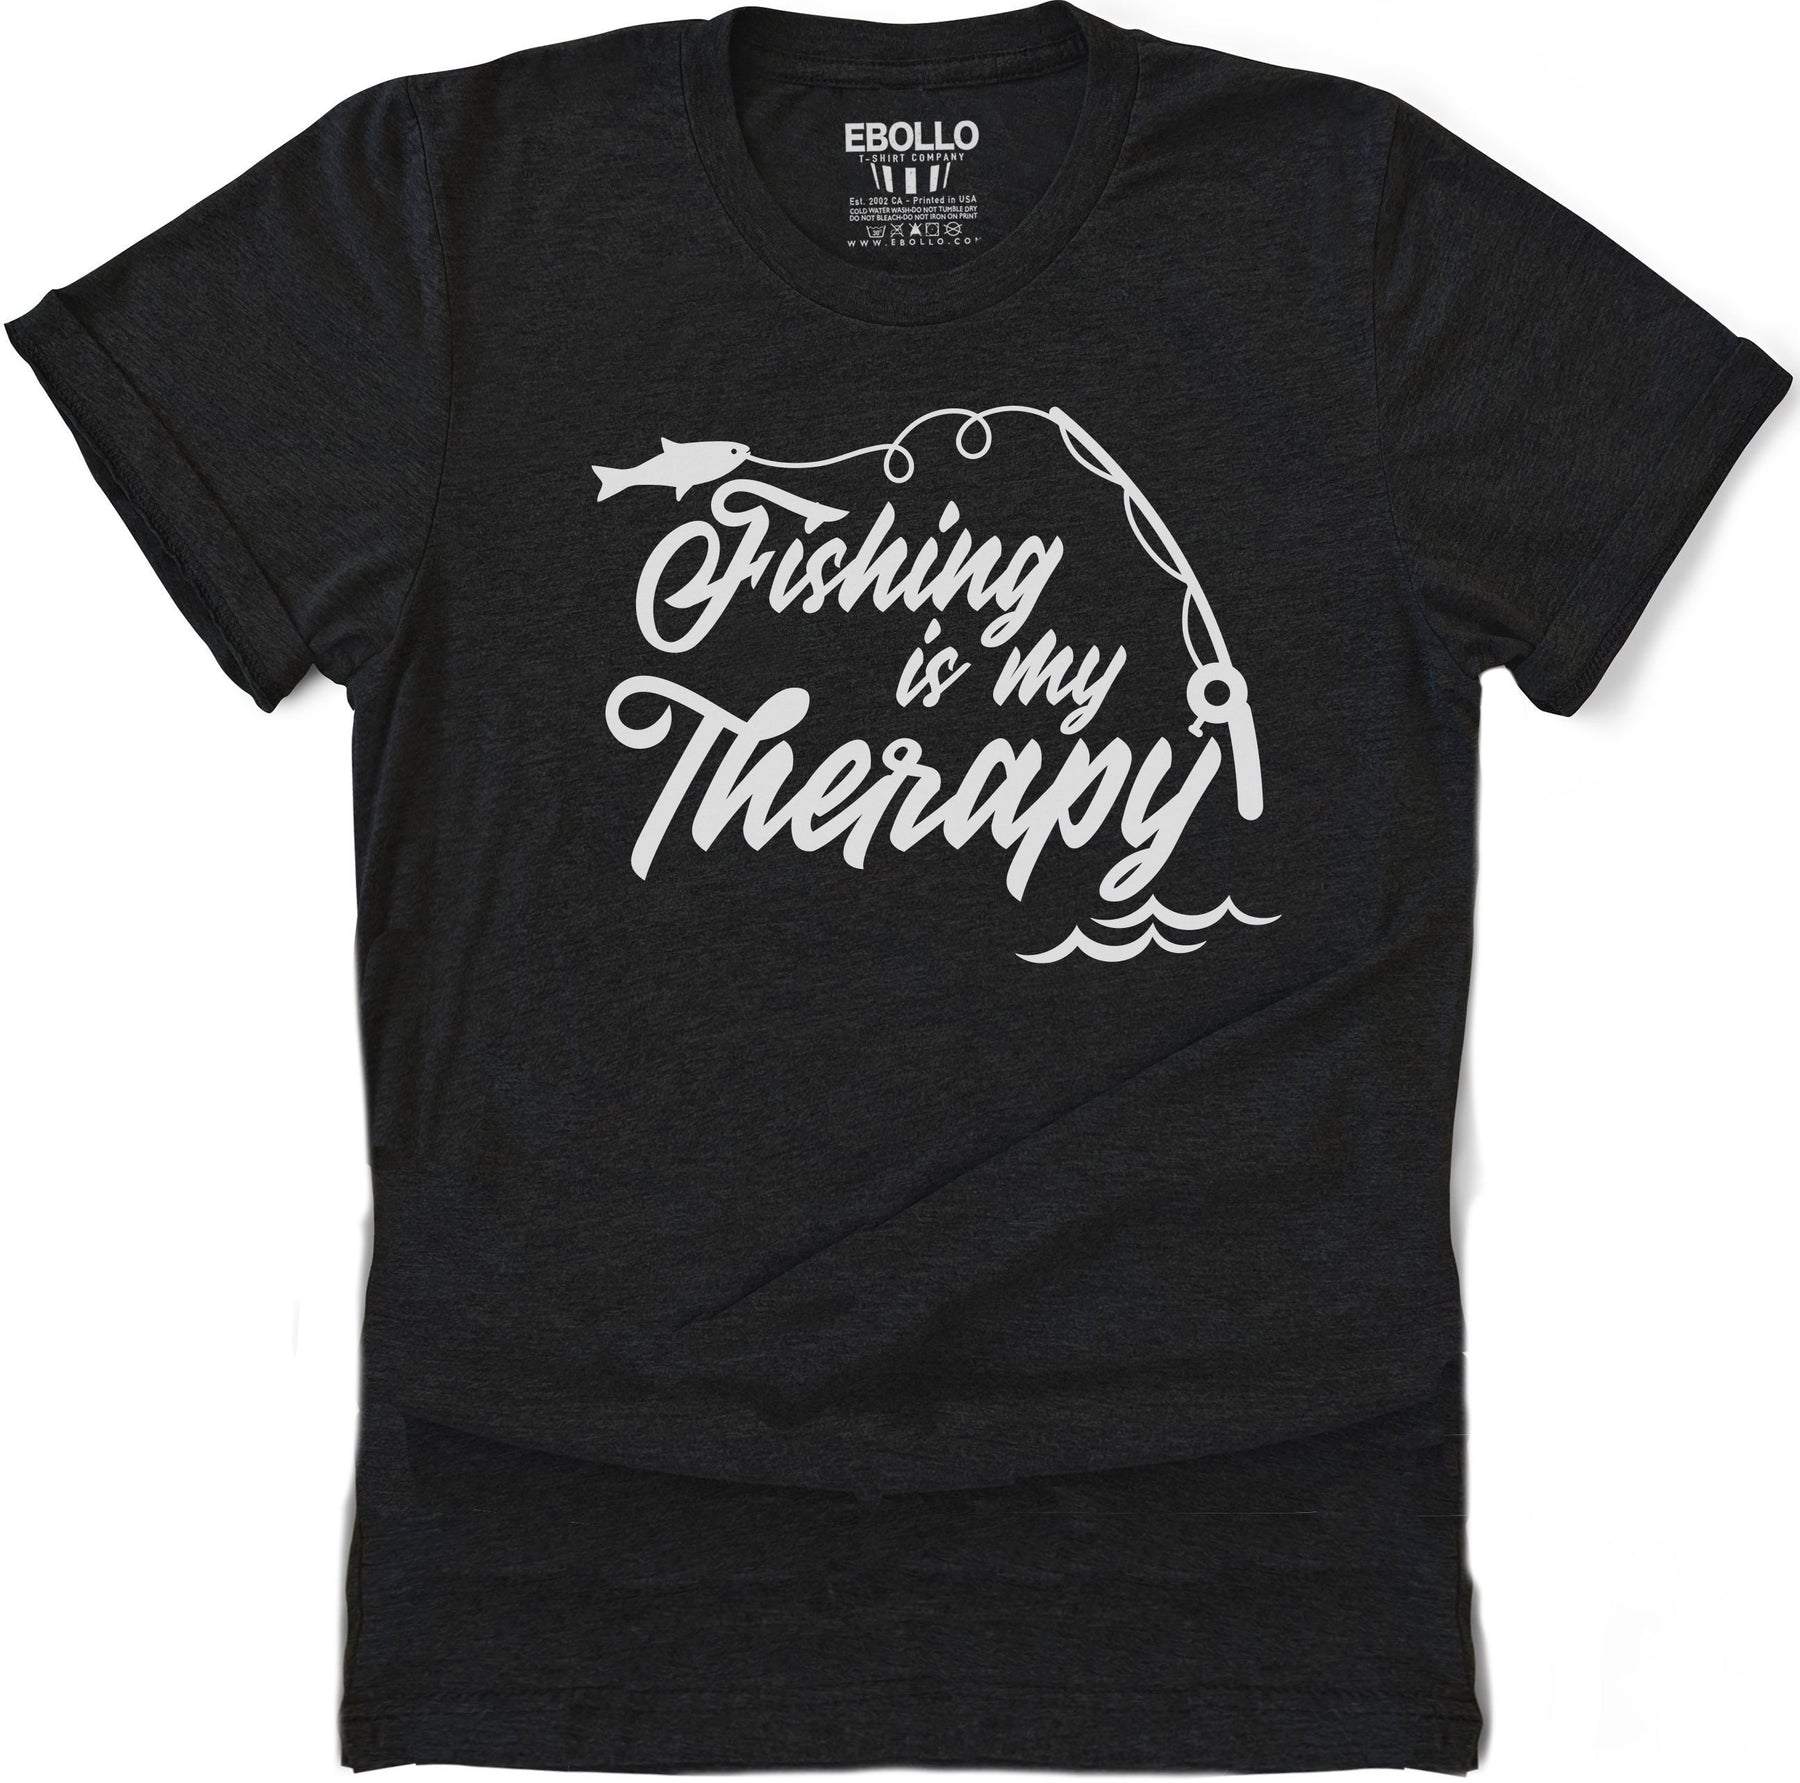 Fishing is My Therapy Shirt, Funny Fishing Shirt - Fathers Day Gift -  Fisherman Gifts - Husband Gift - Shirt for Fisher - Dad Gift